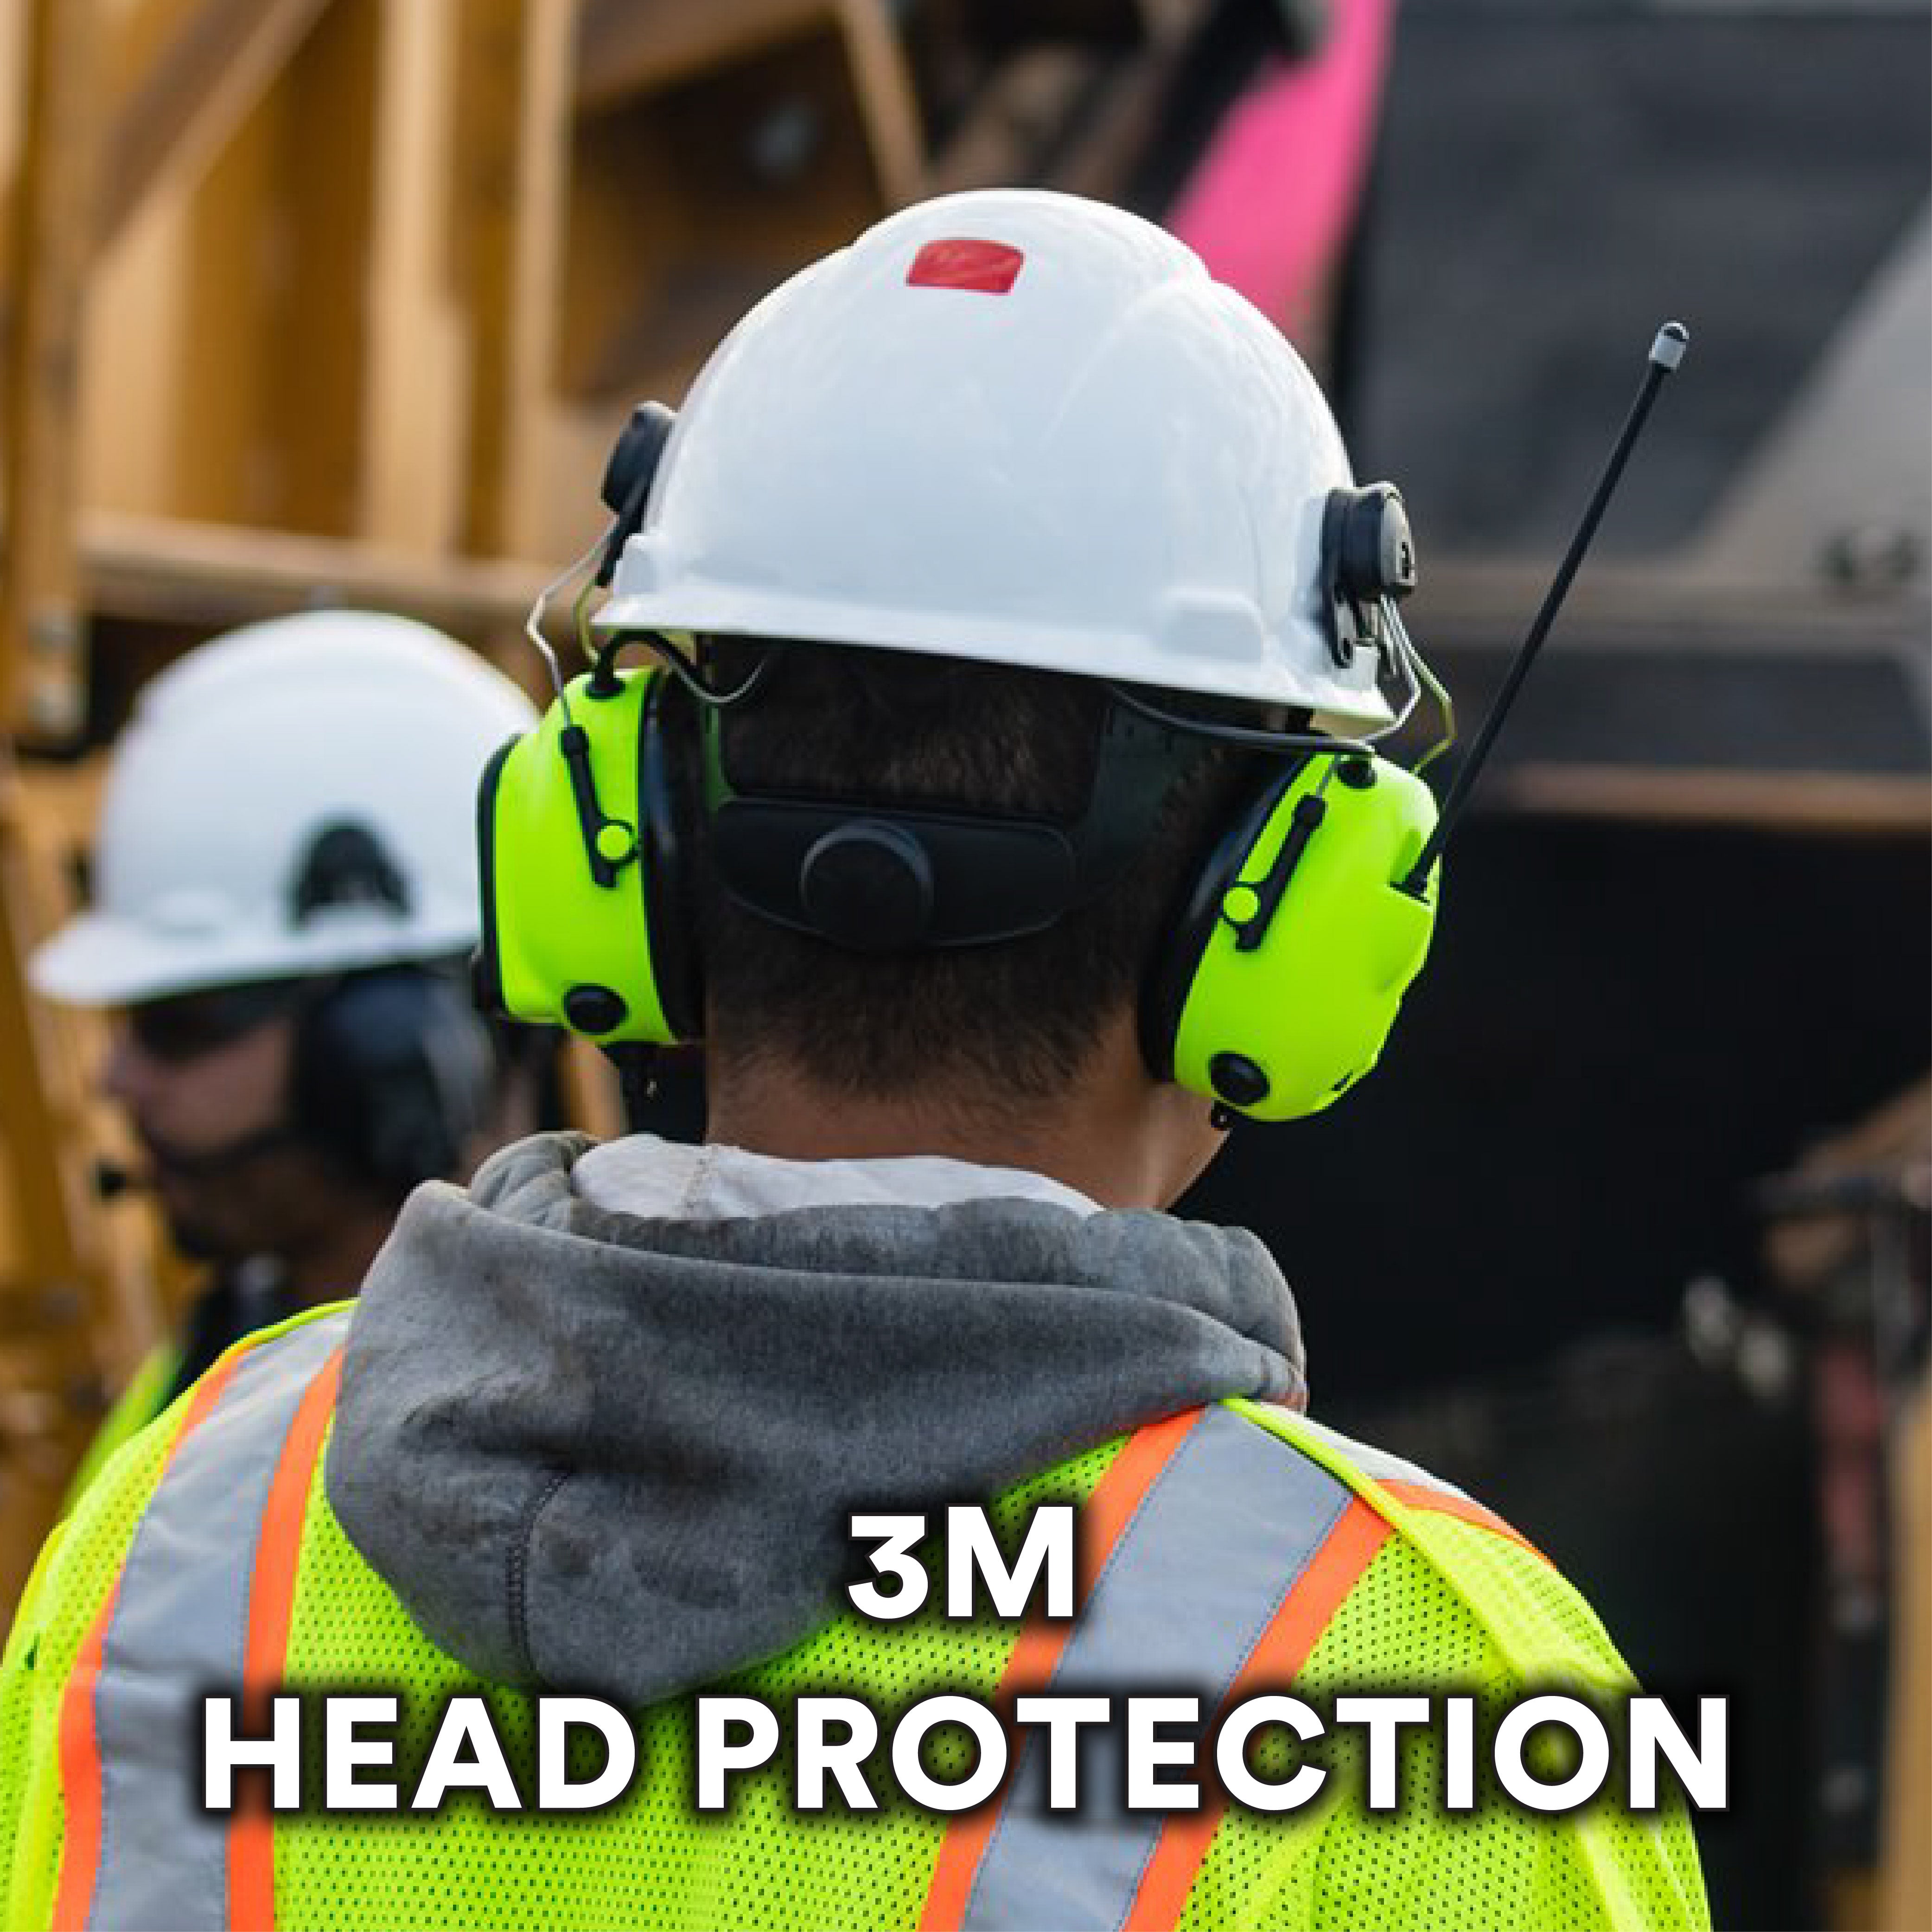 3M Head Protection